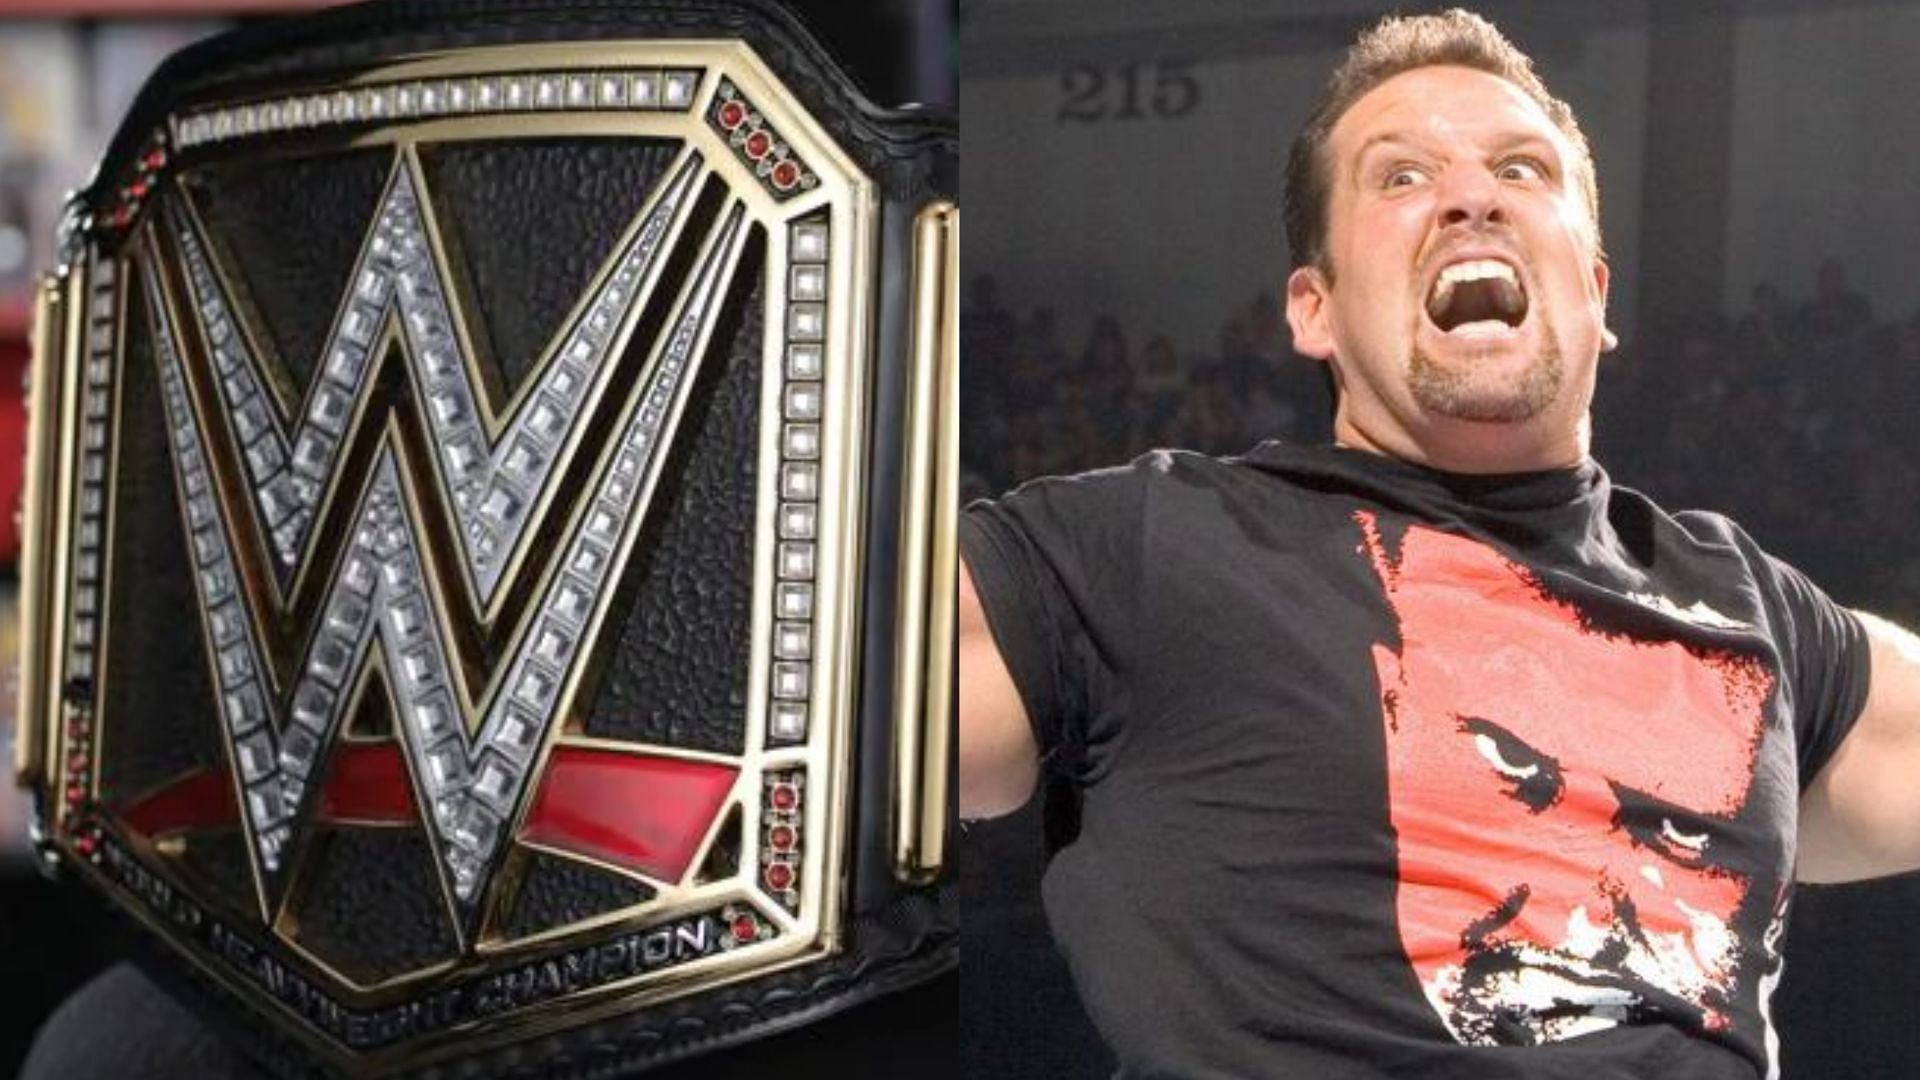 Tommy Dreamer thinks AEW fans will go nuts if a former champion returns